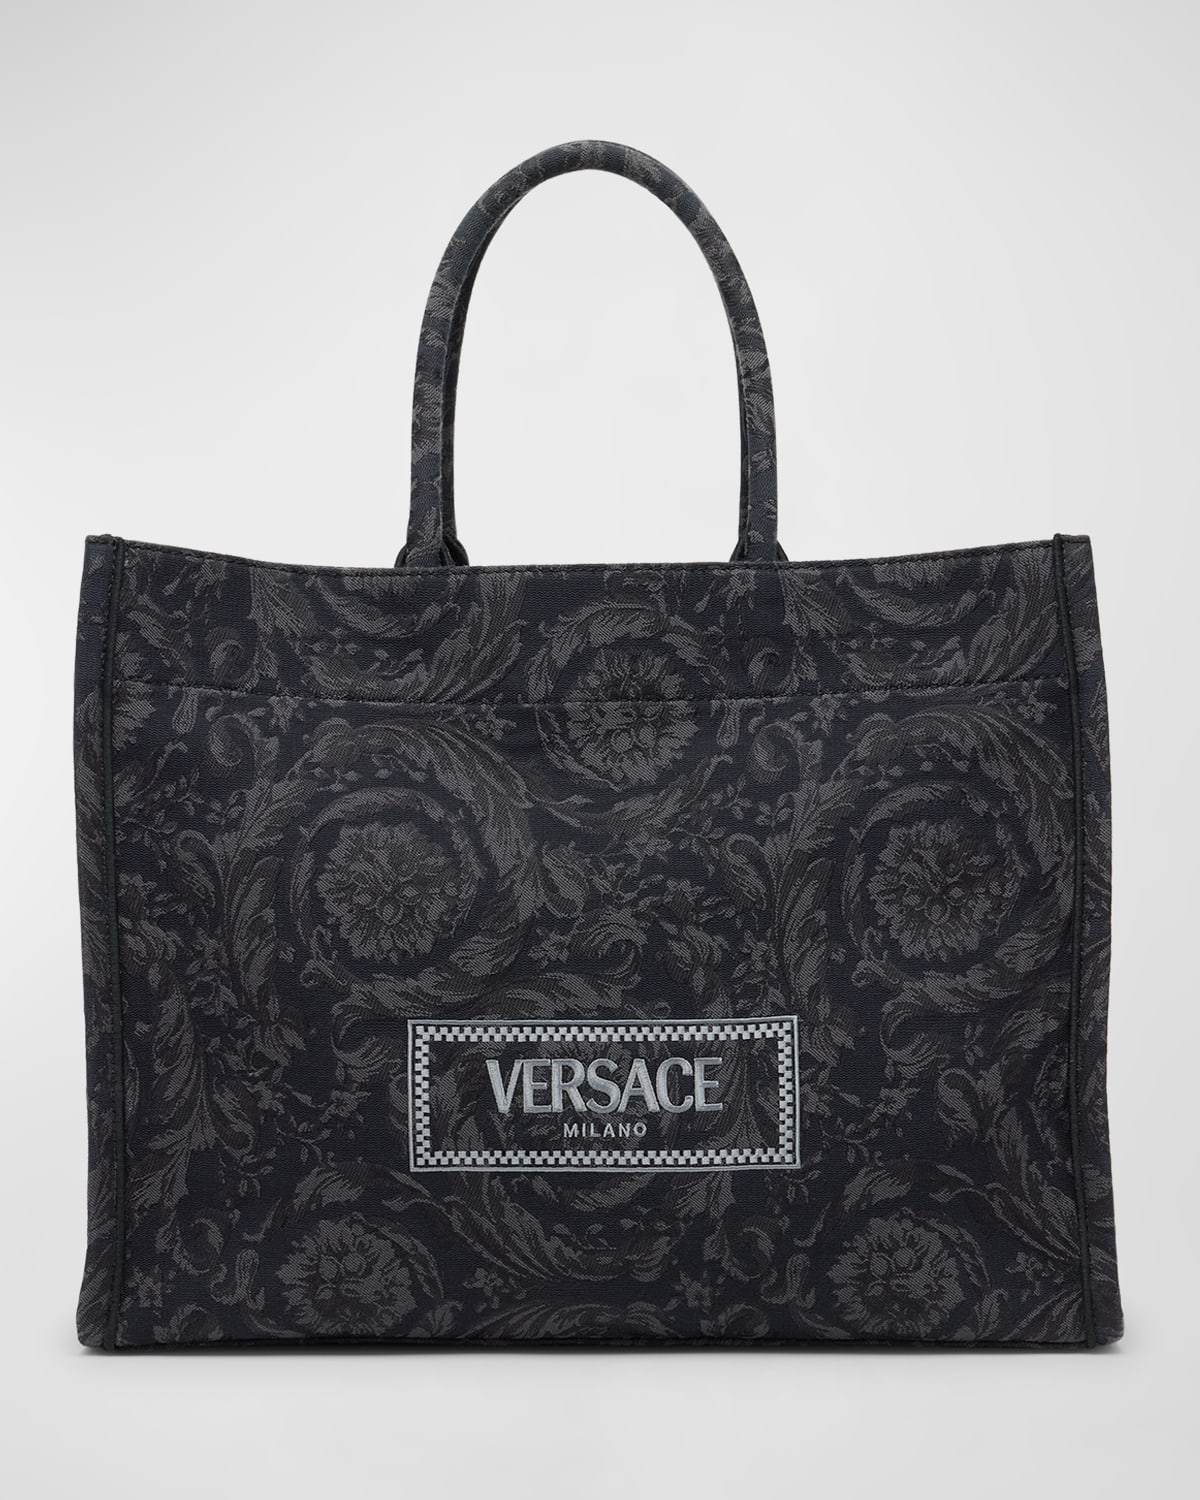 XL Jacquard Embroidered Canvas Tote Bag